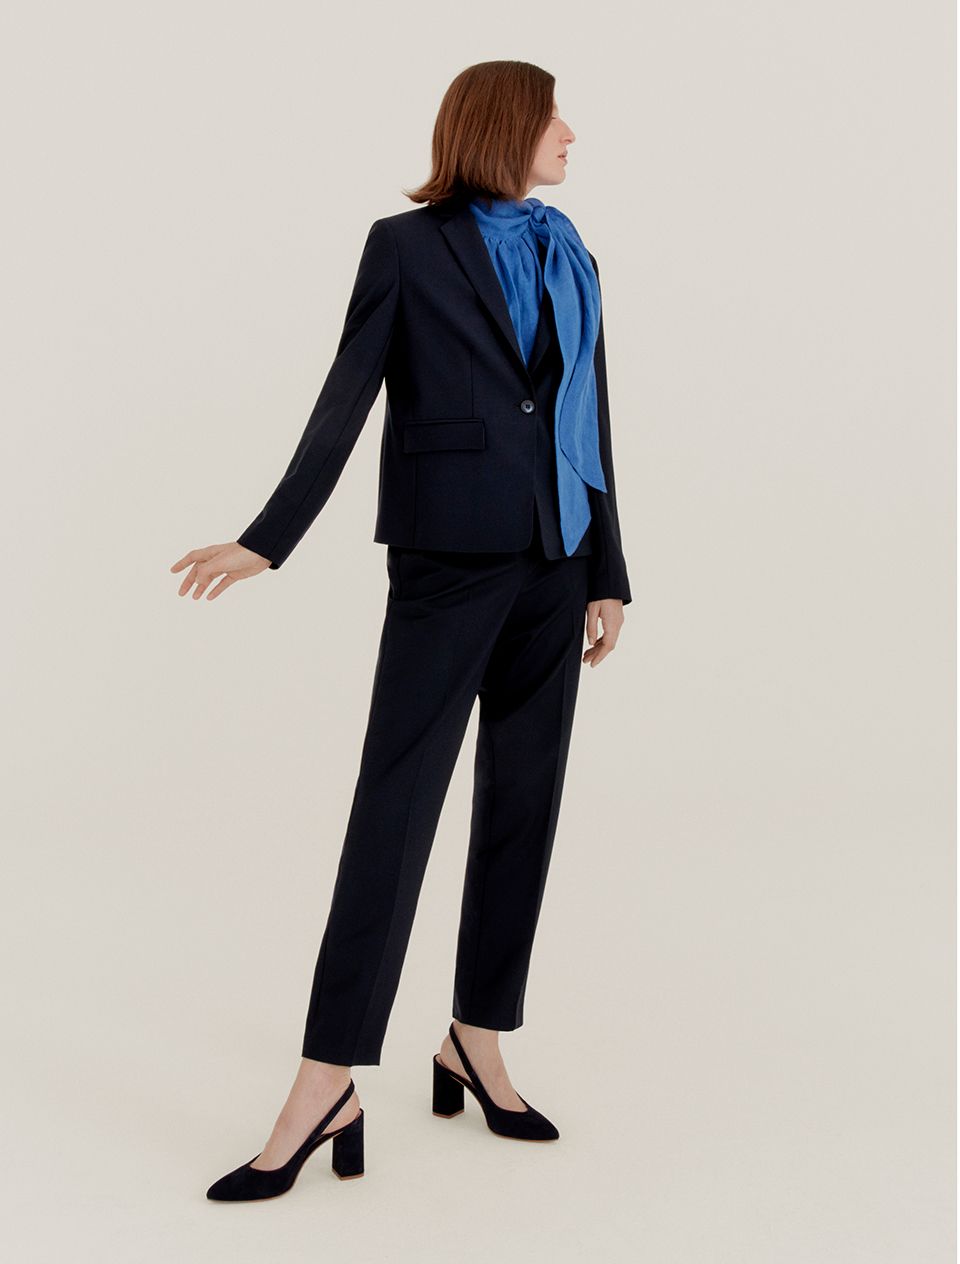 Woman in a black suit and blue blouse